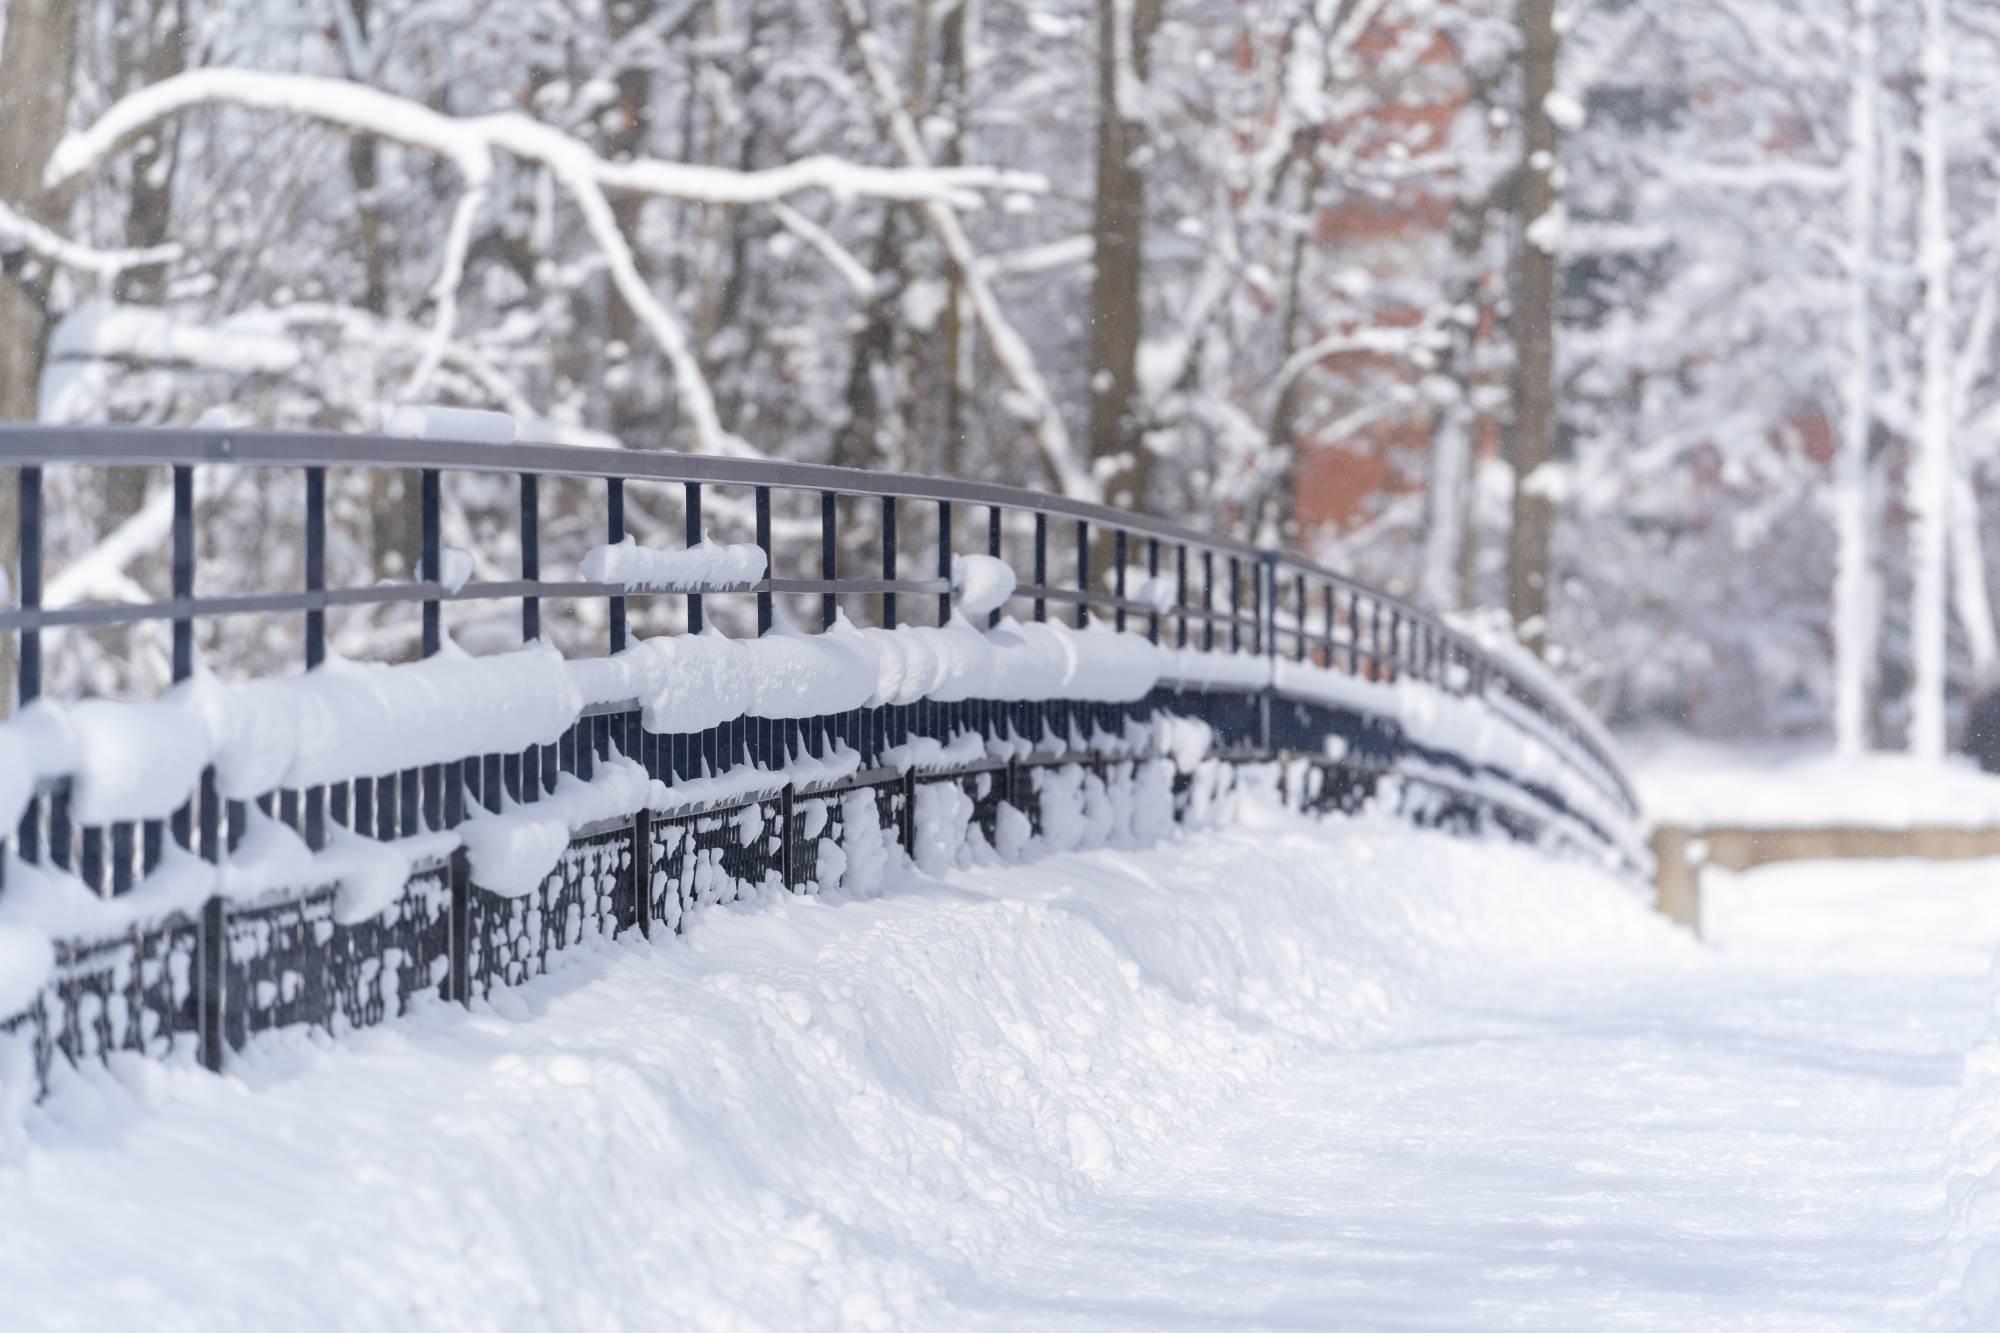 The blue Little Mac Bridge on GVSU's Allendale Campus in the winter with snow on the ground